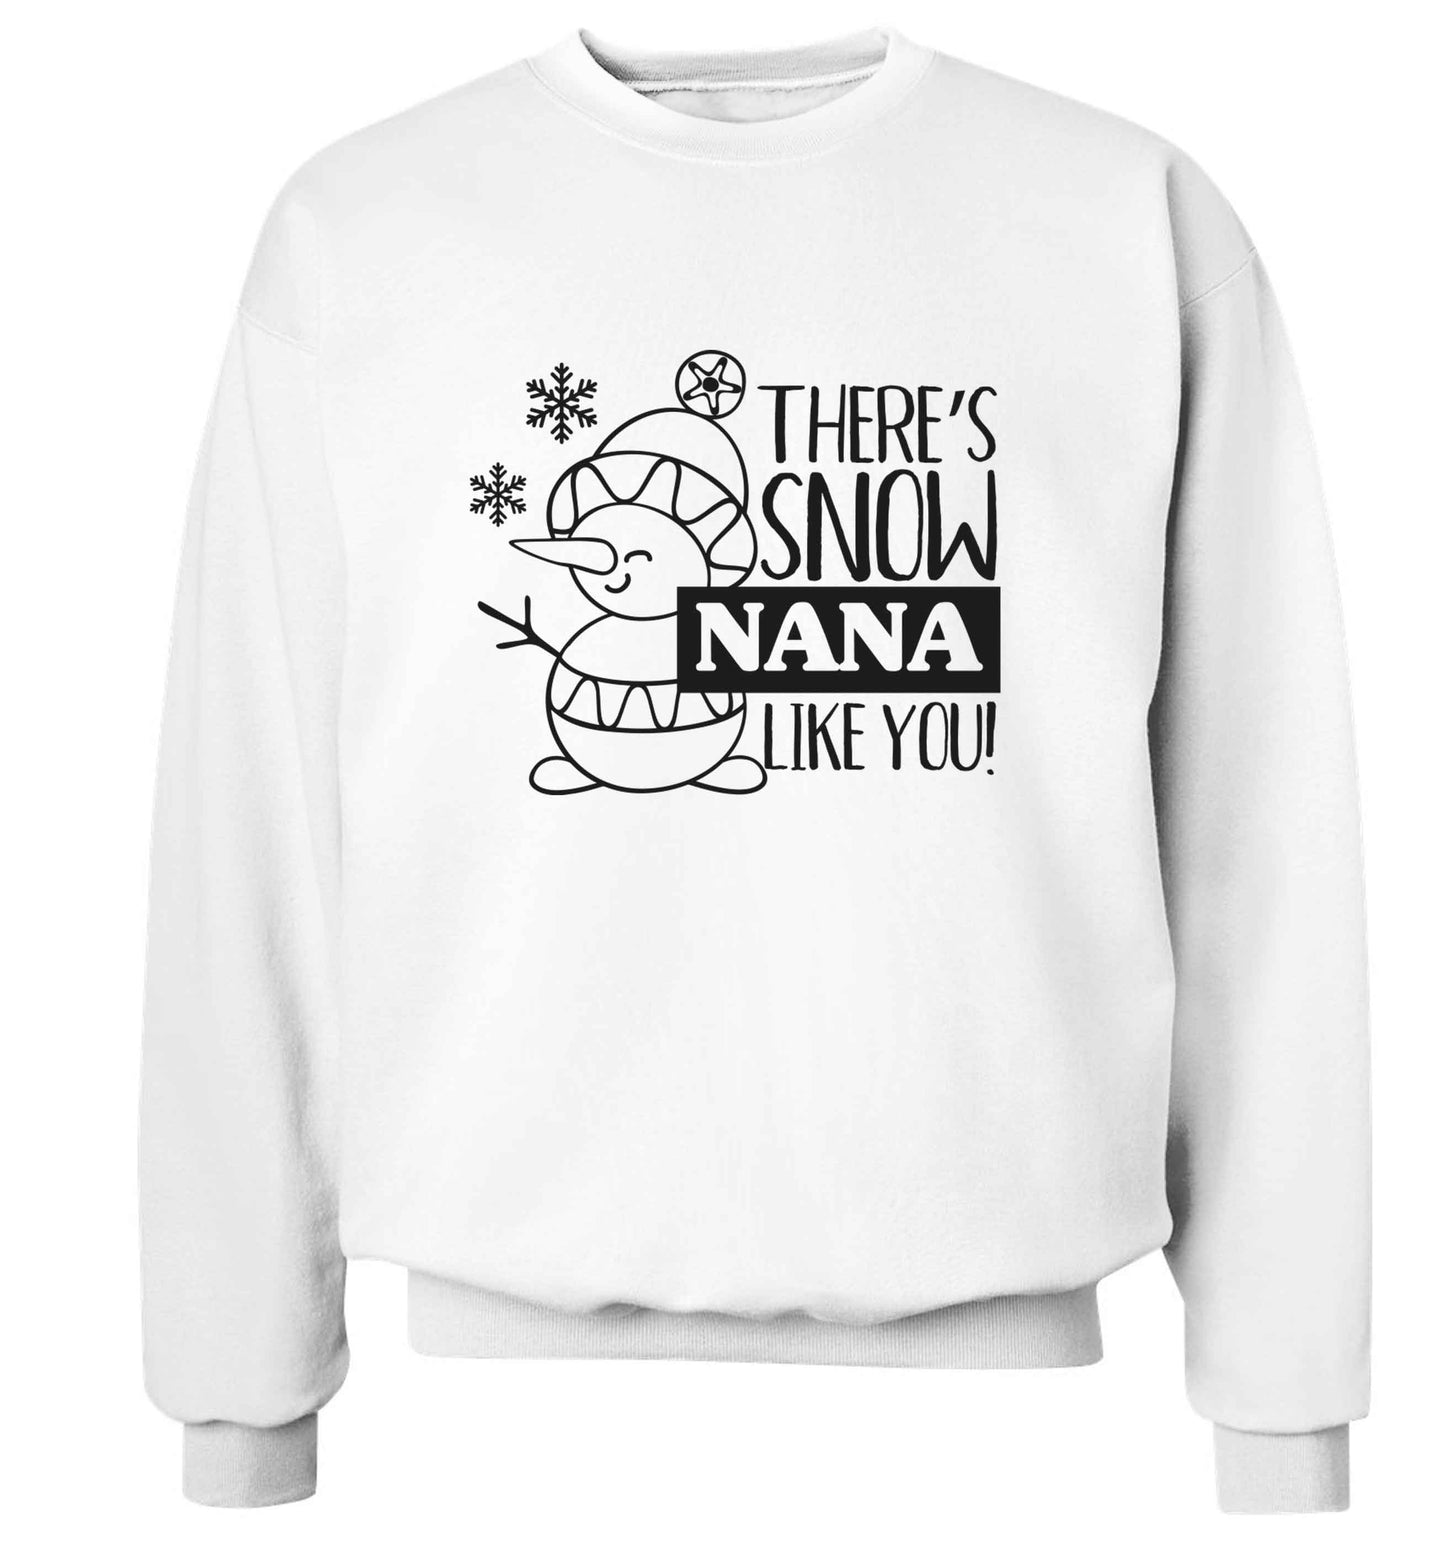 There's snow nana like you adult's unisex white sweater 2XL